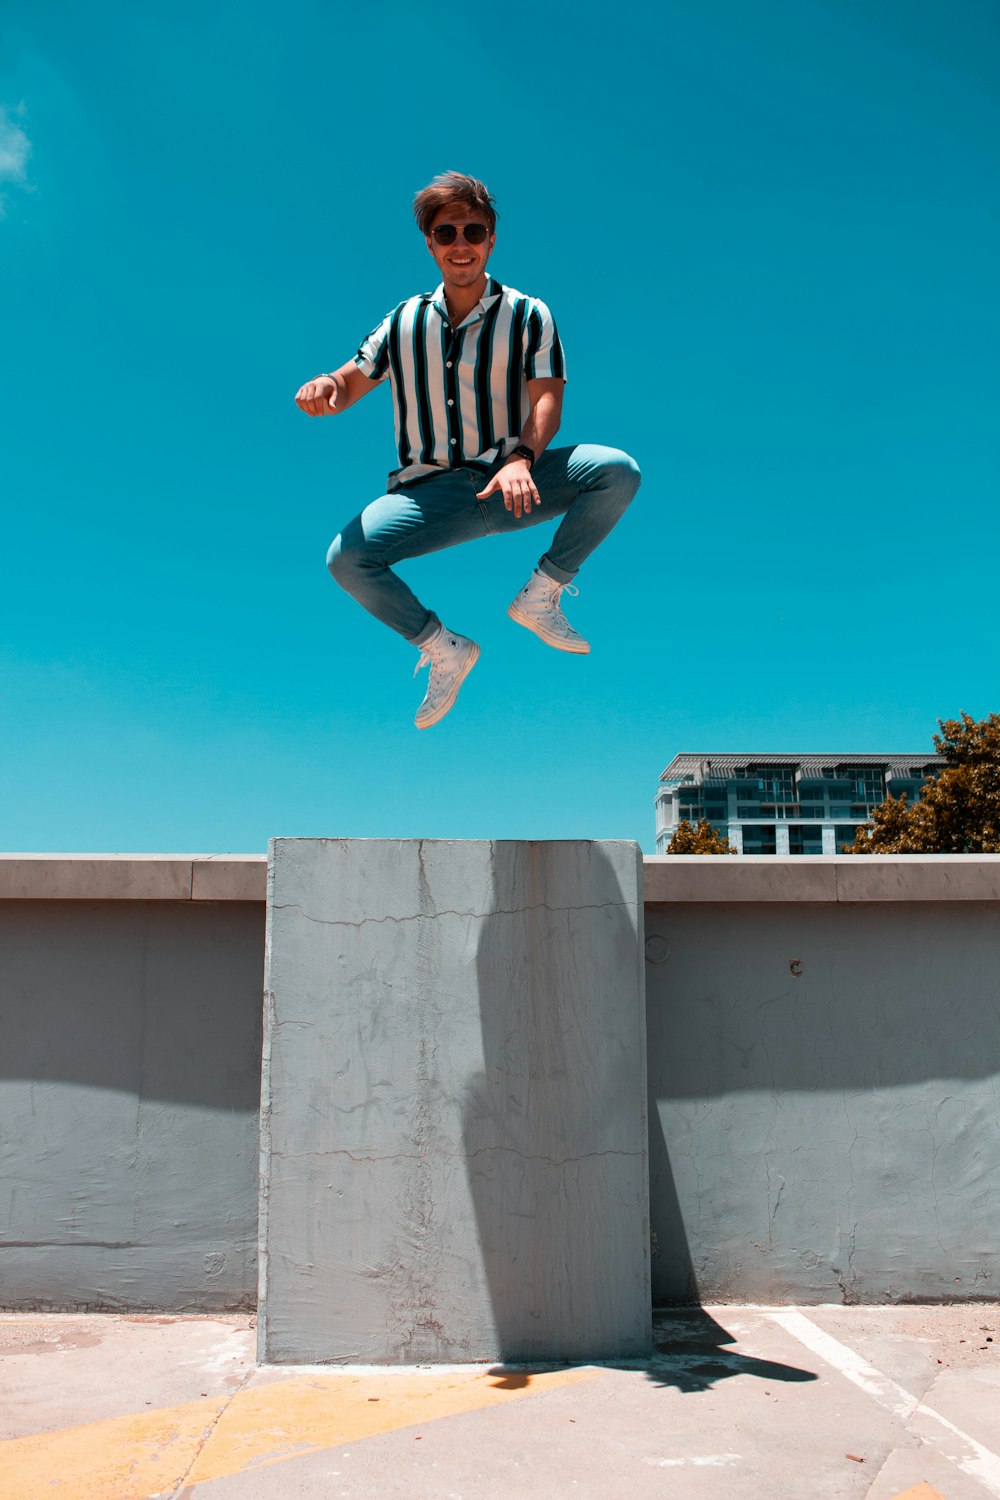 man in mid air above concrete floor and fence during day